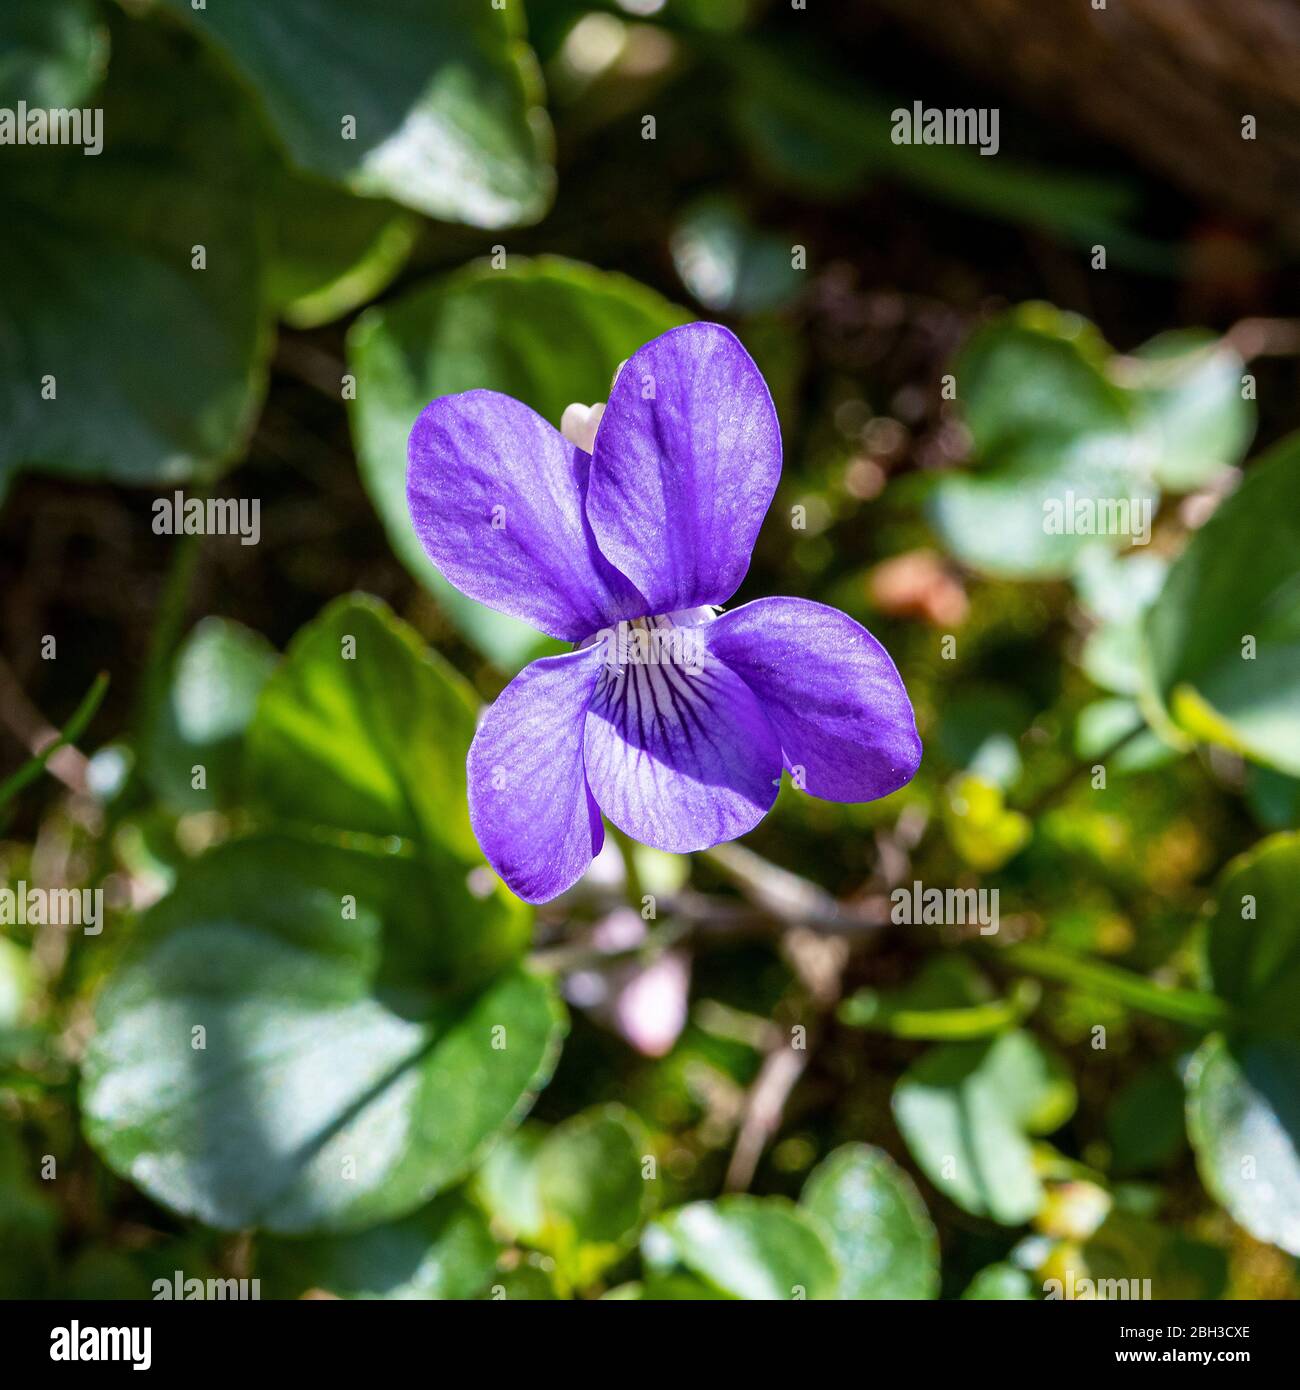 A Common Dog Violet Flower in Bloom in a Garden in Alsager Cheshire England United Kingdom UK Stock Photo